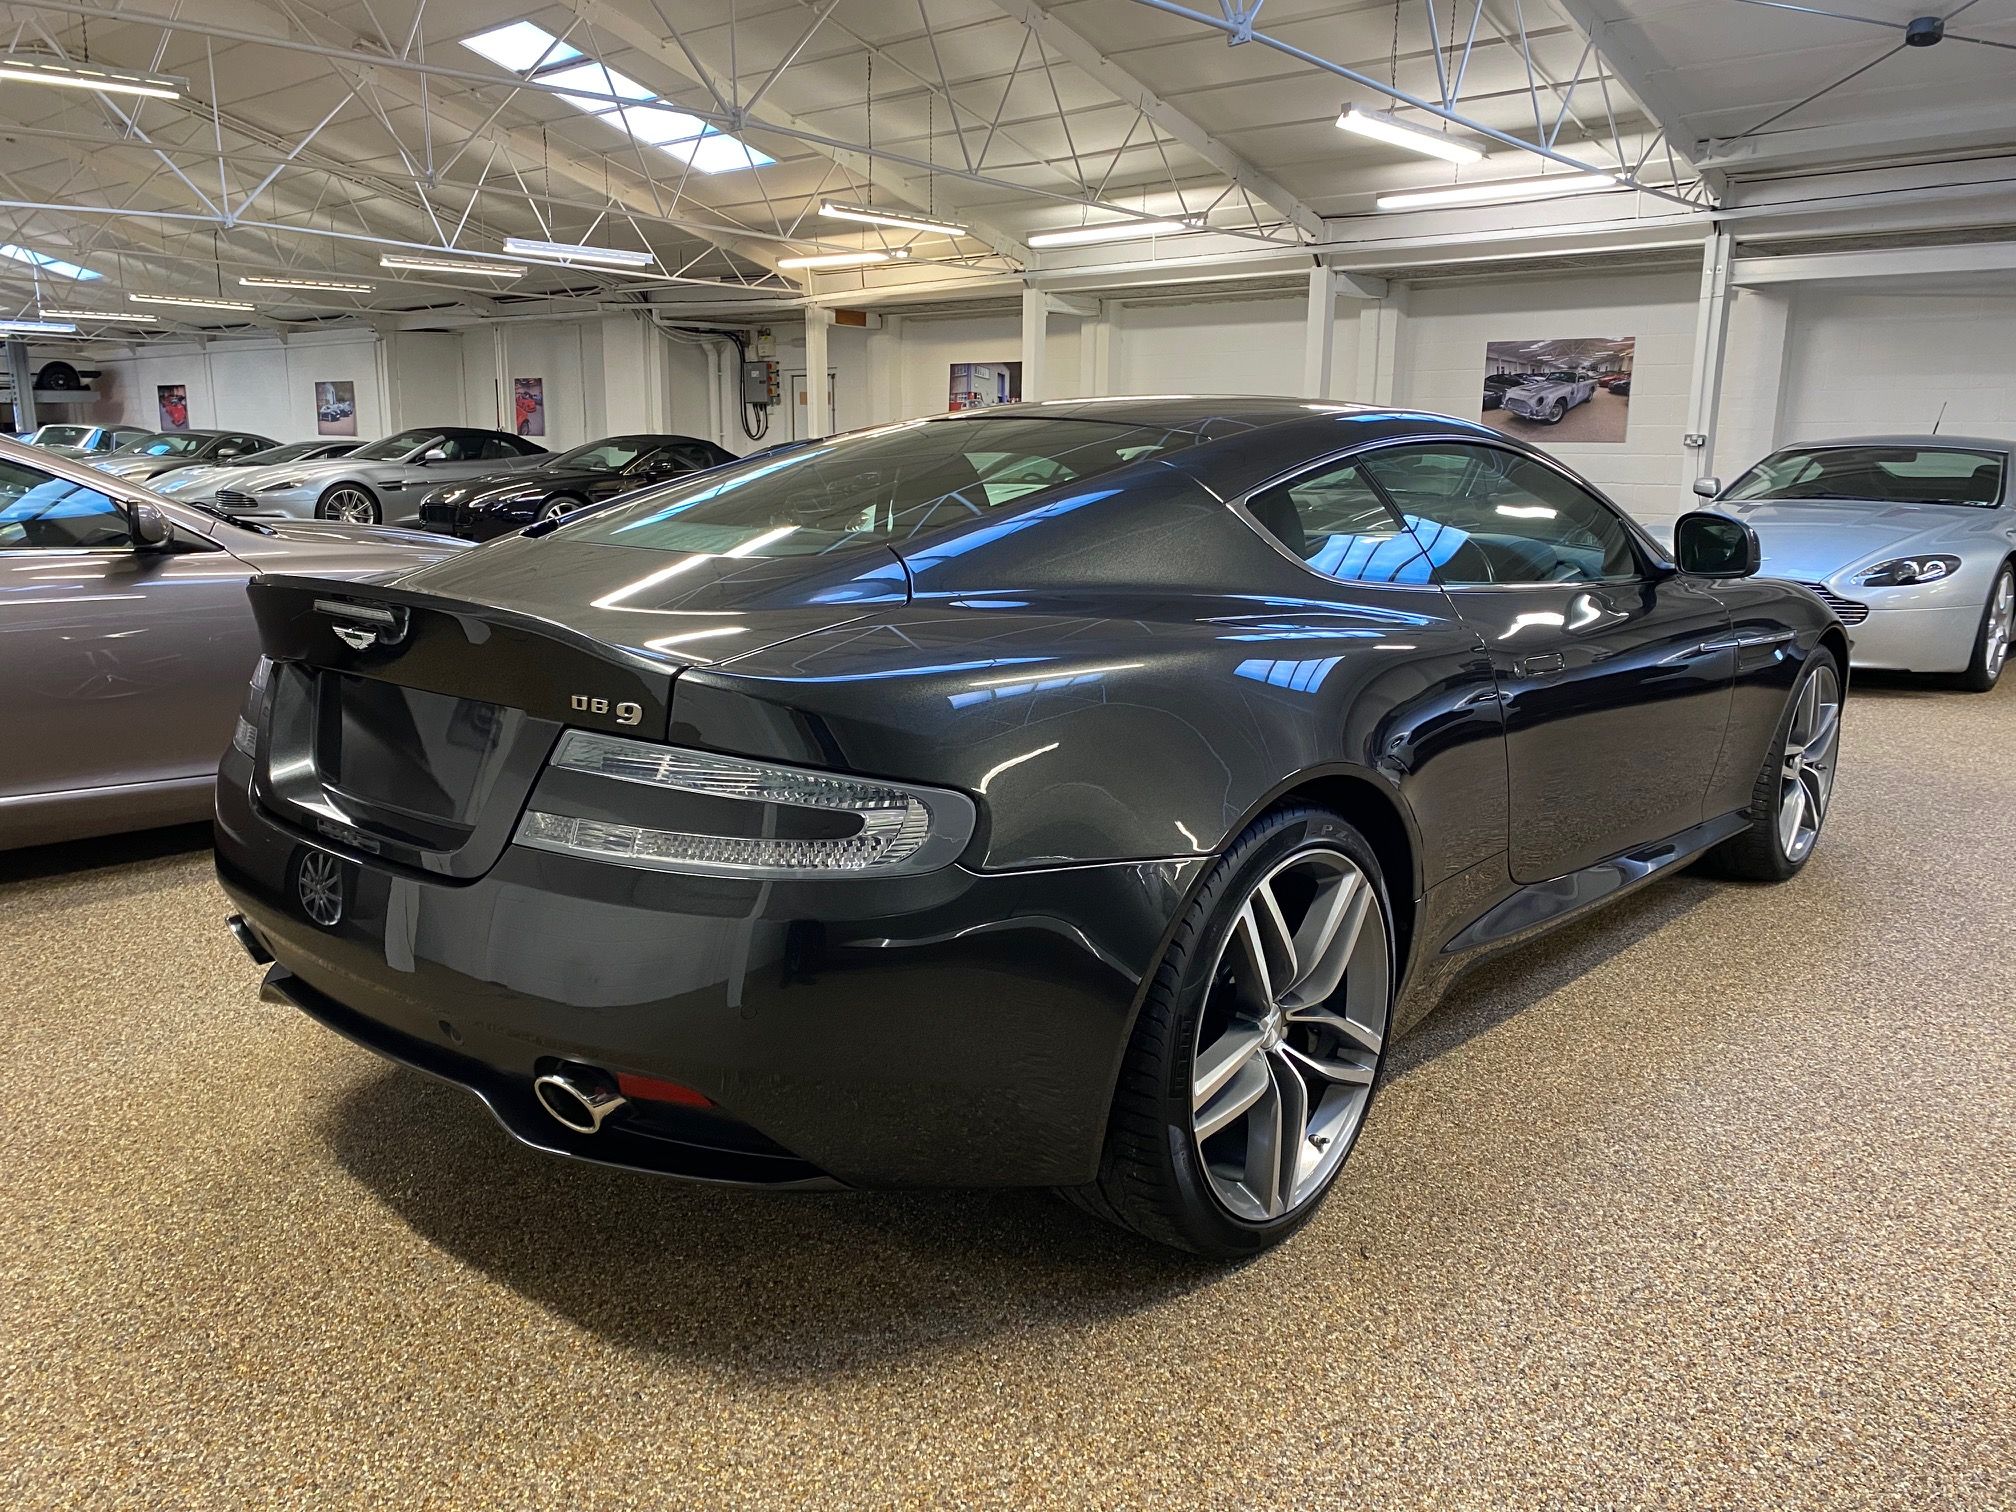 Used Aston Martin DB9 for sale